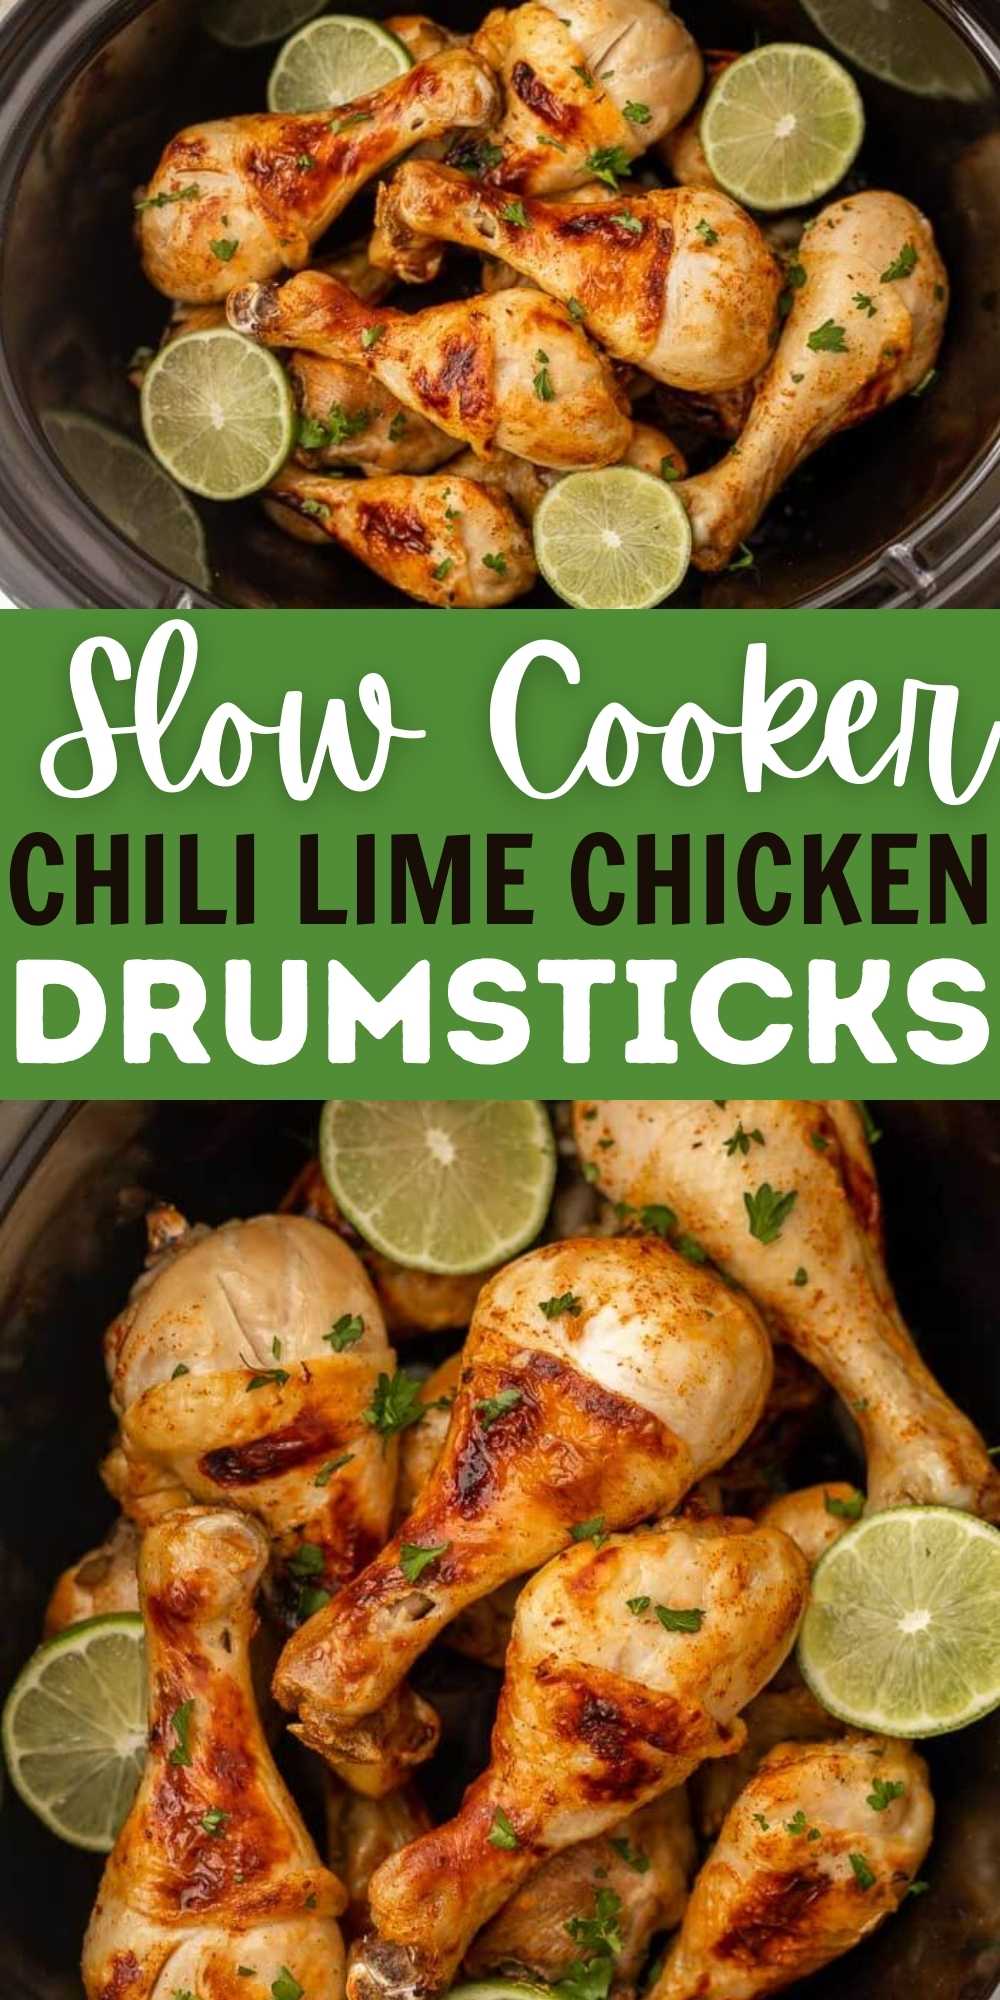 With just a few ingredients, you can make Crock Pot Chili Lime Chicken Drumsticks Recipe. The chili and lime combine for an incredible meal. This Slow Cooker Cilantro Lime Drumsticks are easy to make and packed with tons of flavor too. #eatingonadime #crockpotrecipes #slowcookerrecipes #chickenrecipes #drumstickrecipes 